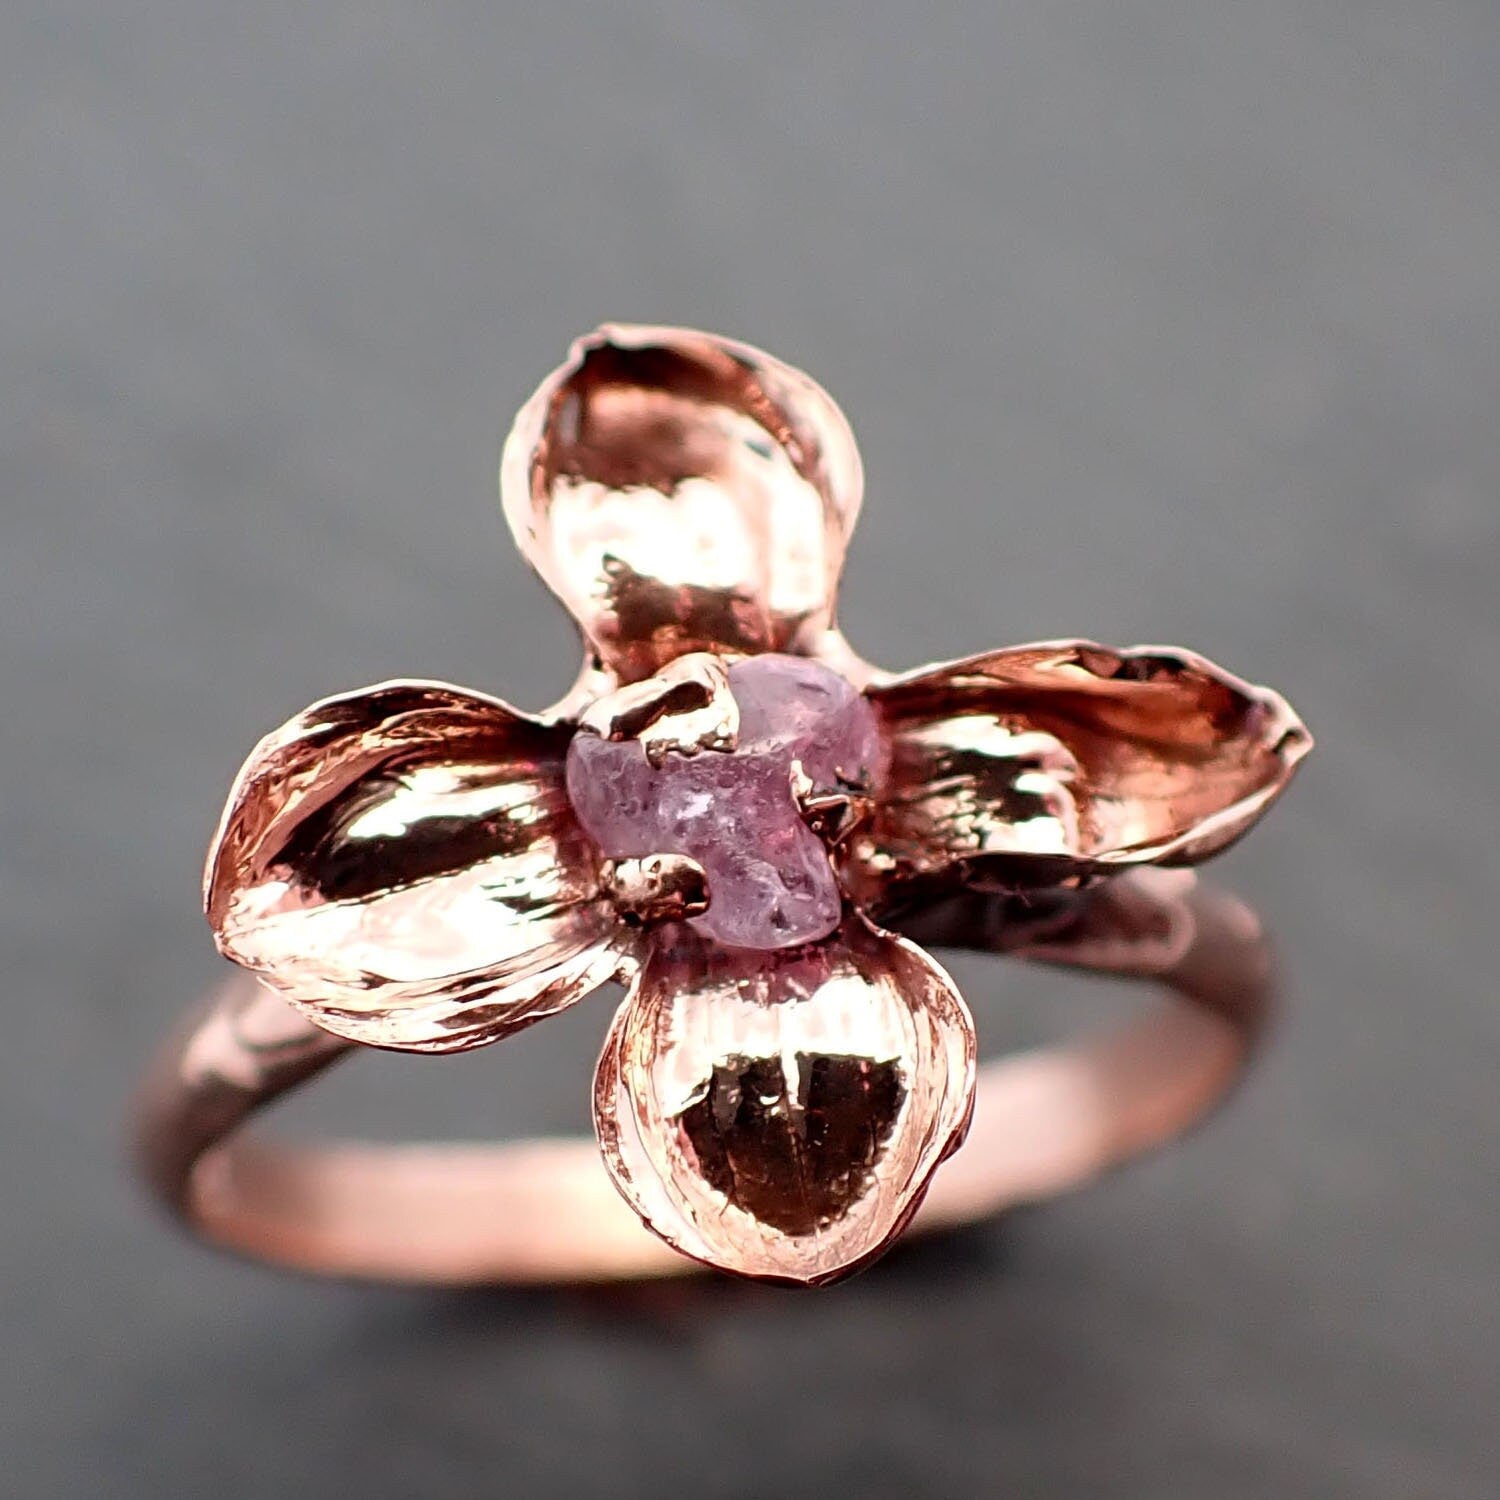 Real Flower and pink Sapphire 14k Rose gold wedding engagement ring Enchanted Garden Floral Ring byAngeline 3391